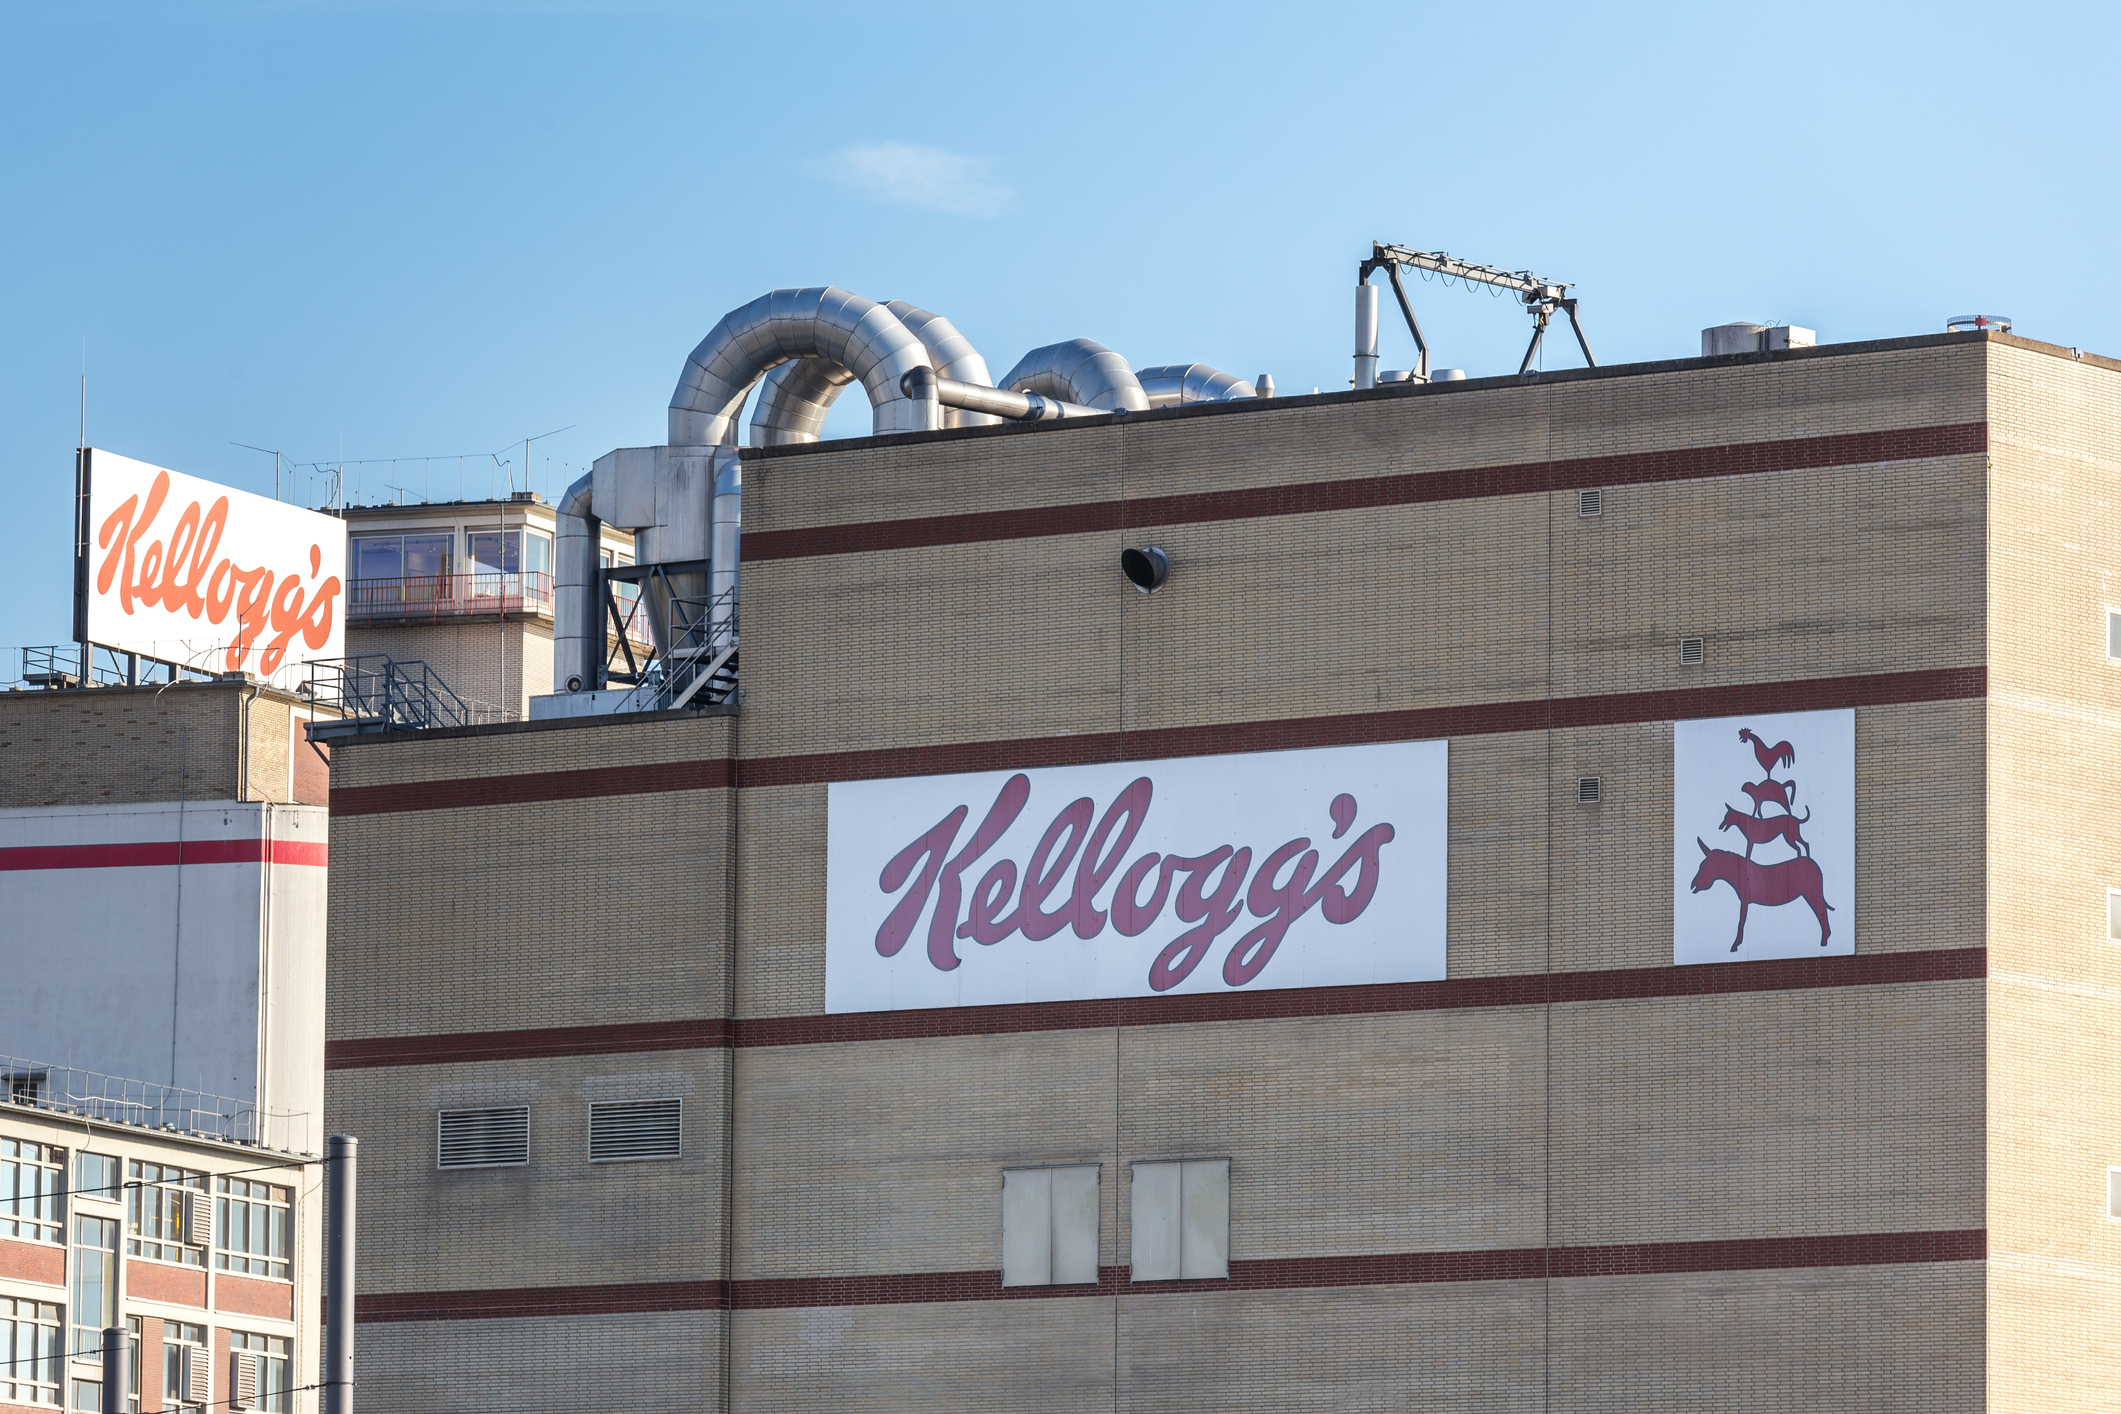 Kellogg's said original Corn Flakes flavour is not affected by the recall notice or any other Kellogg's product.